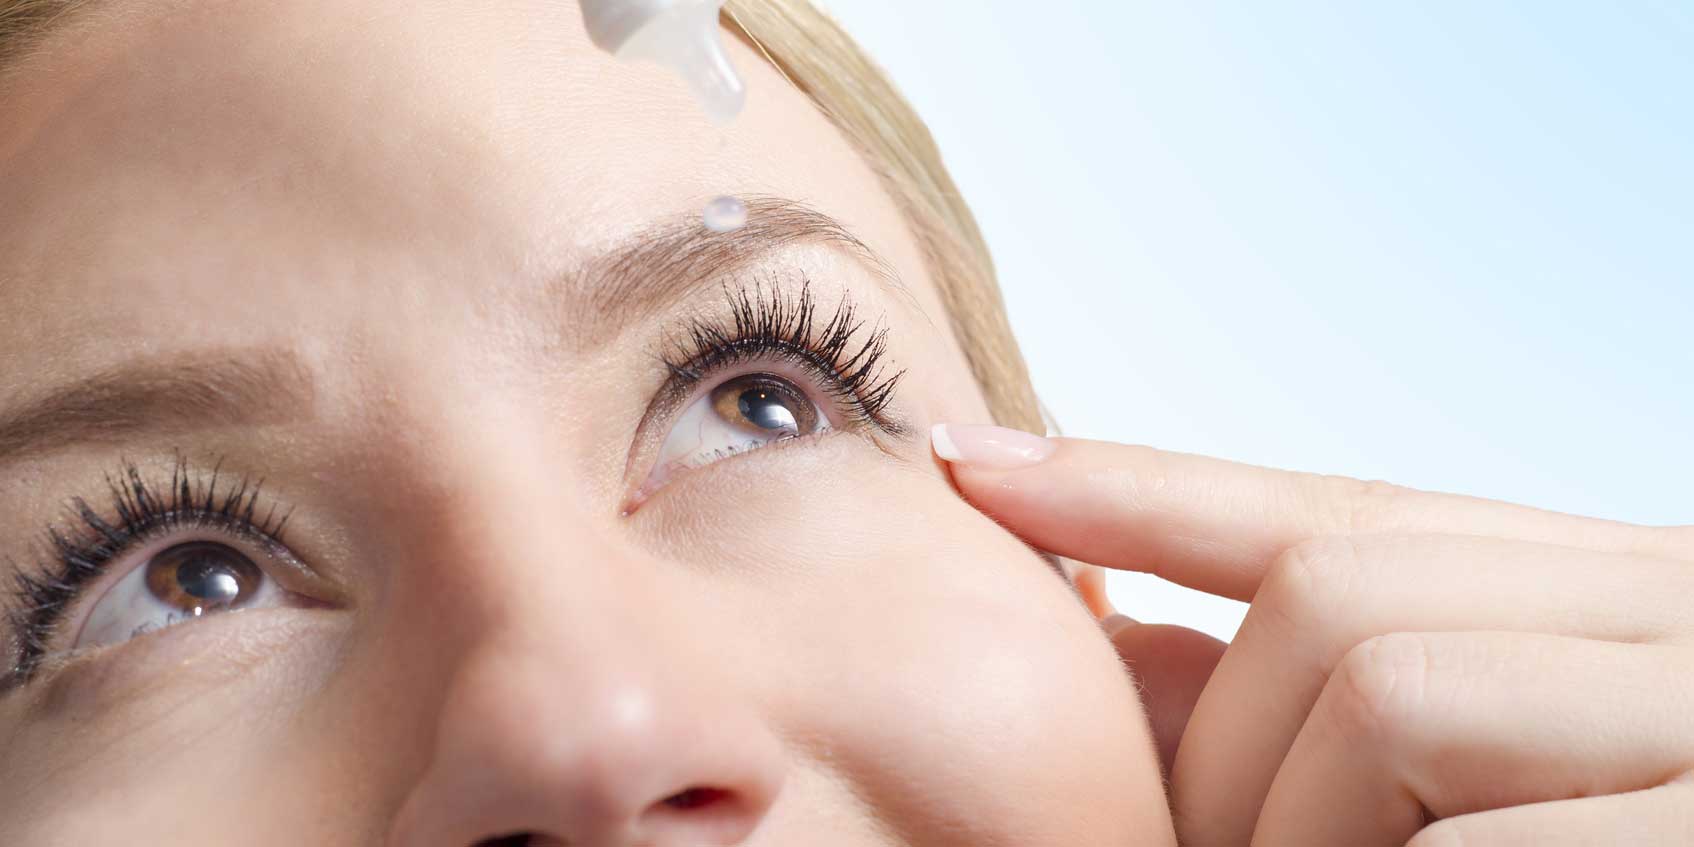 “Dry Eyes”: Treat the Cause, Not the Symptoms